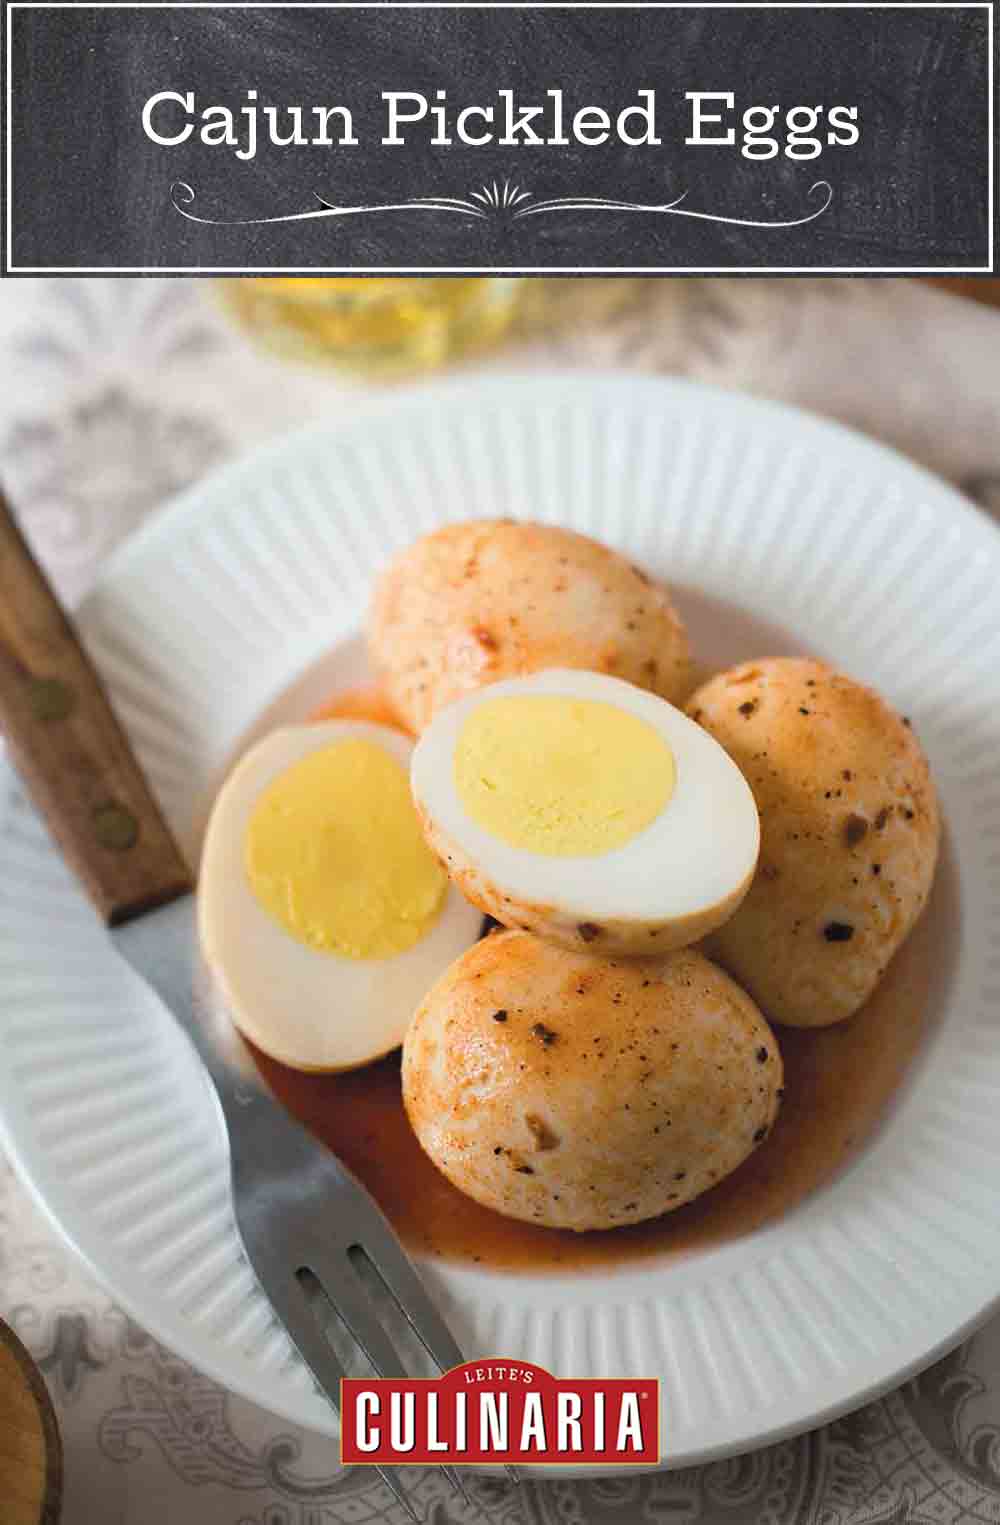 A white plate topped with four Cajun pickled eggs, one of which is cut in half. A fork rests on the plate.